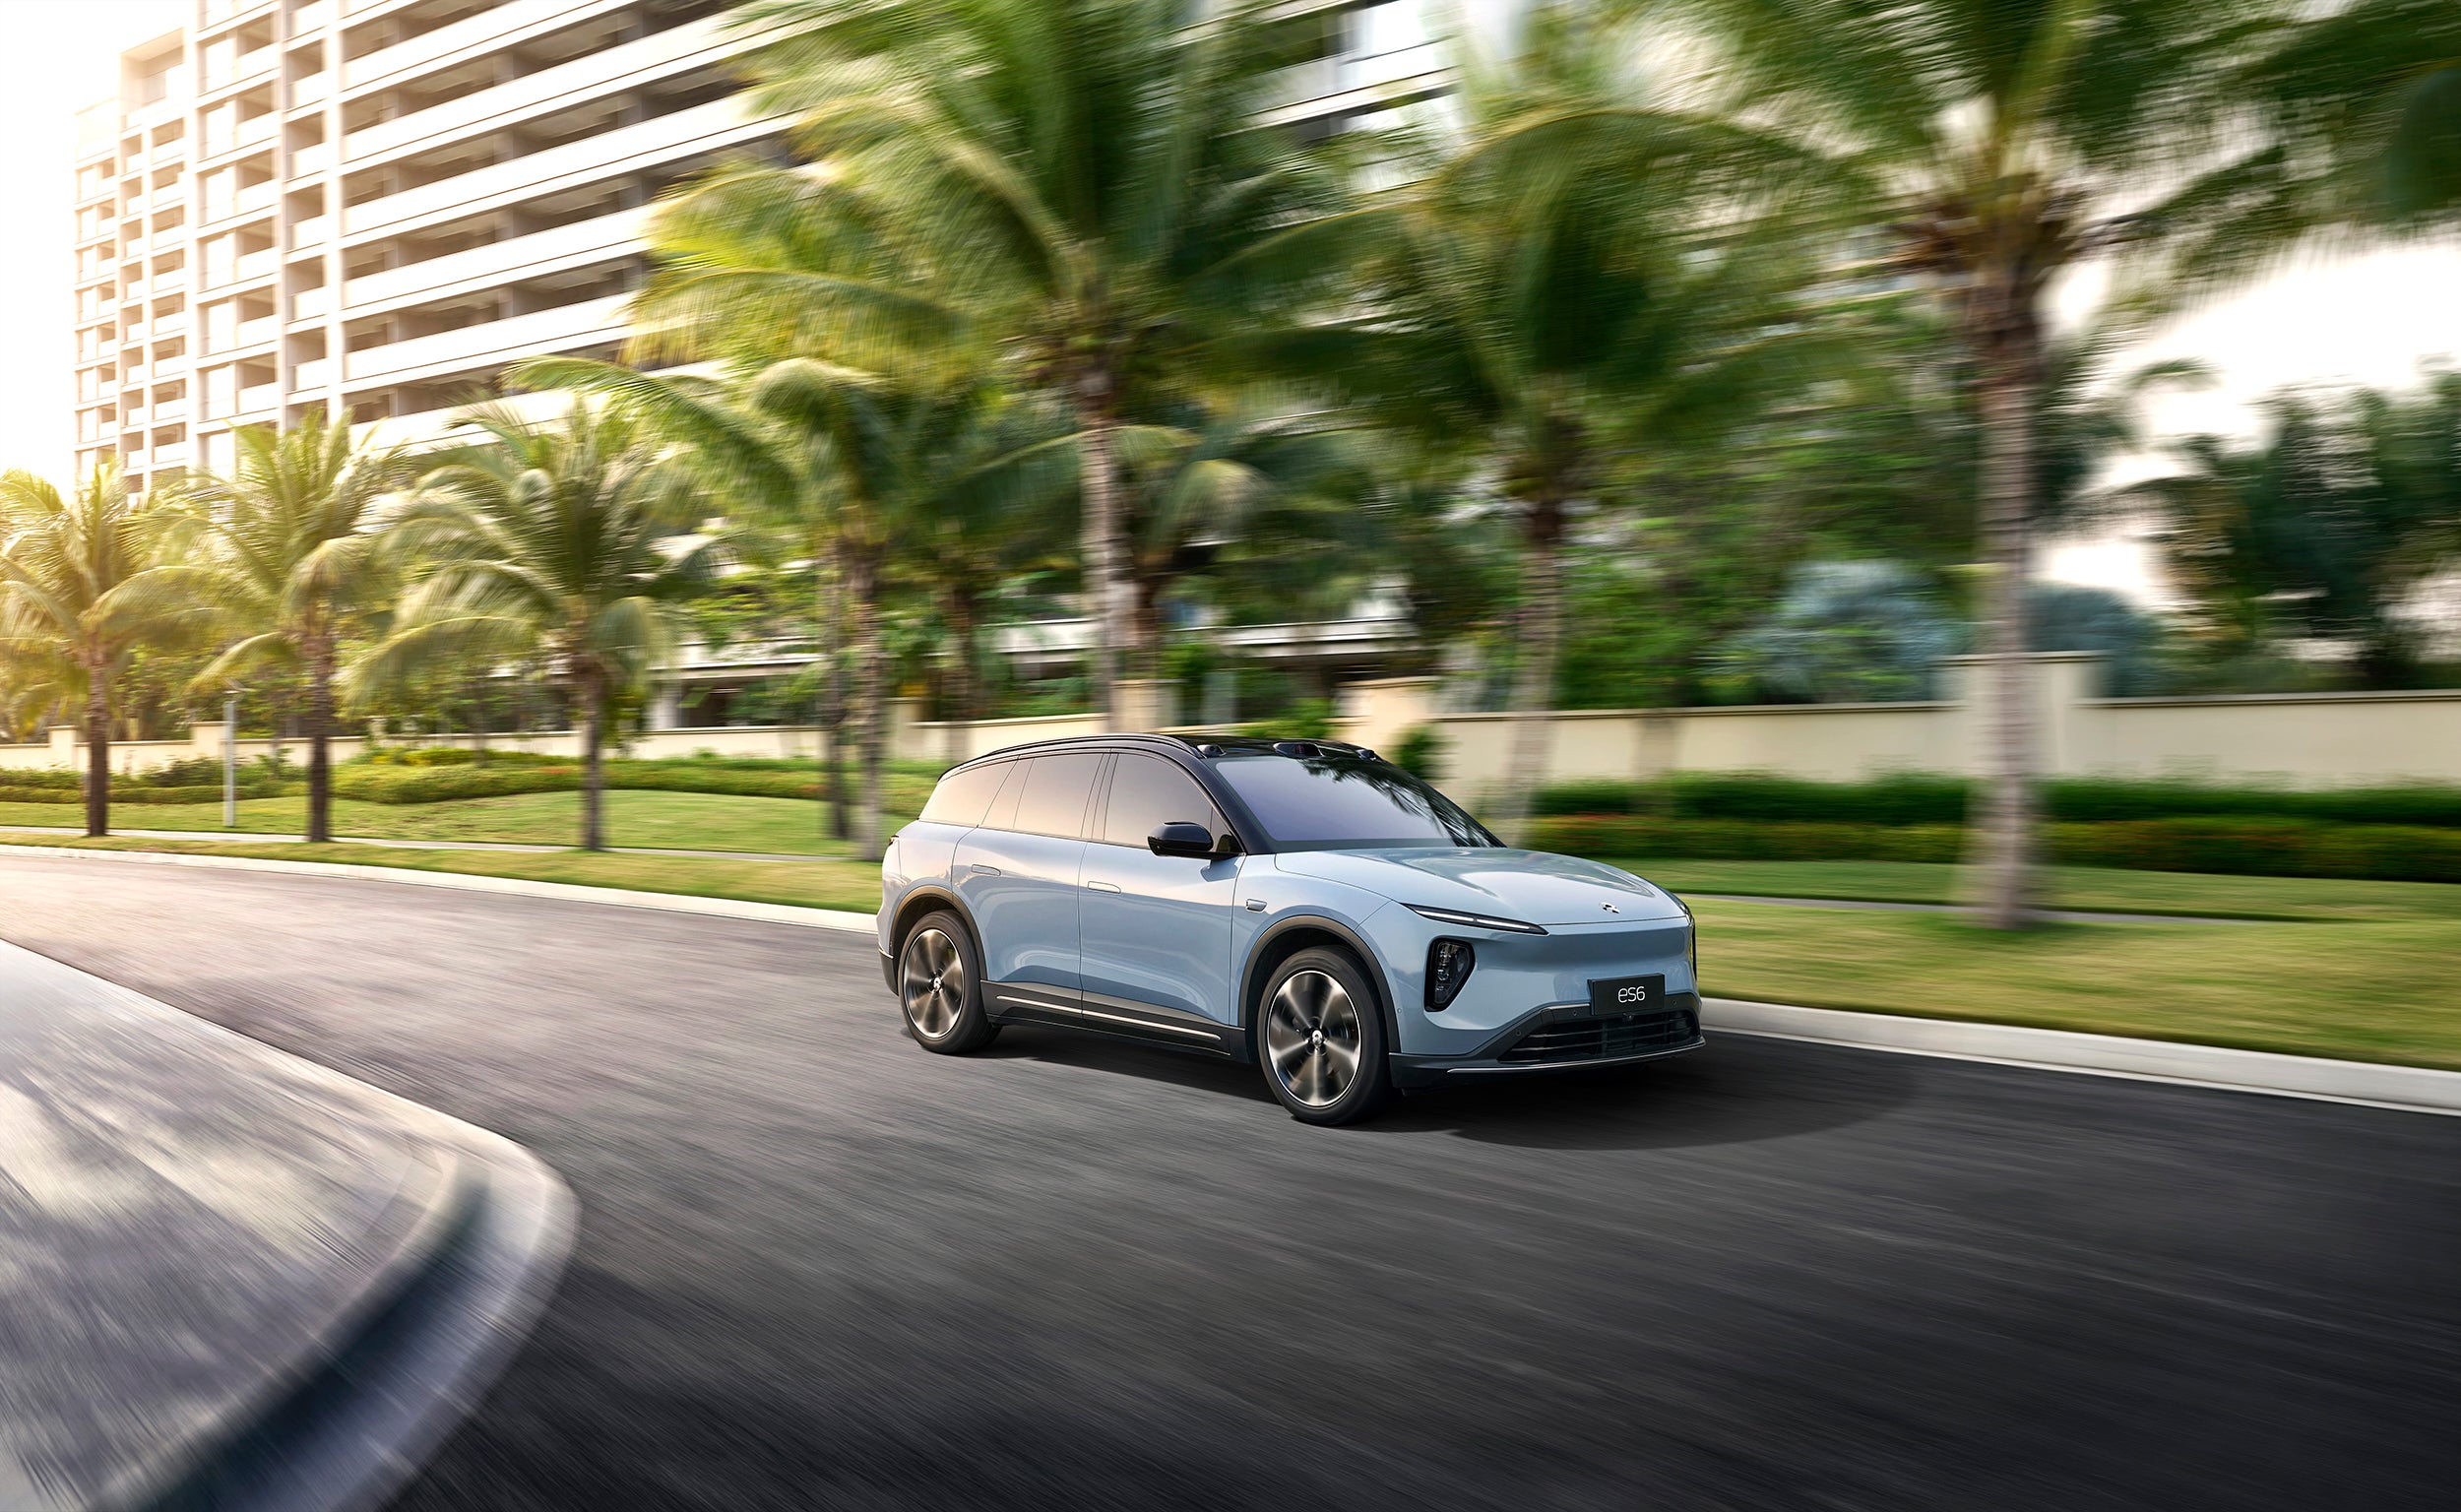 NIO Launches the All-New ES6, a Smart Electric All-Round SUV, in China